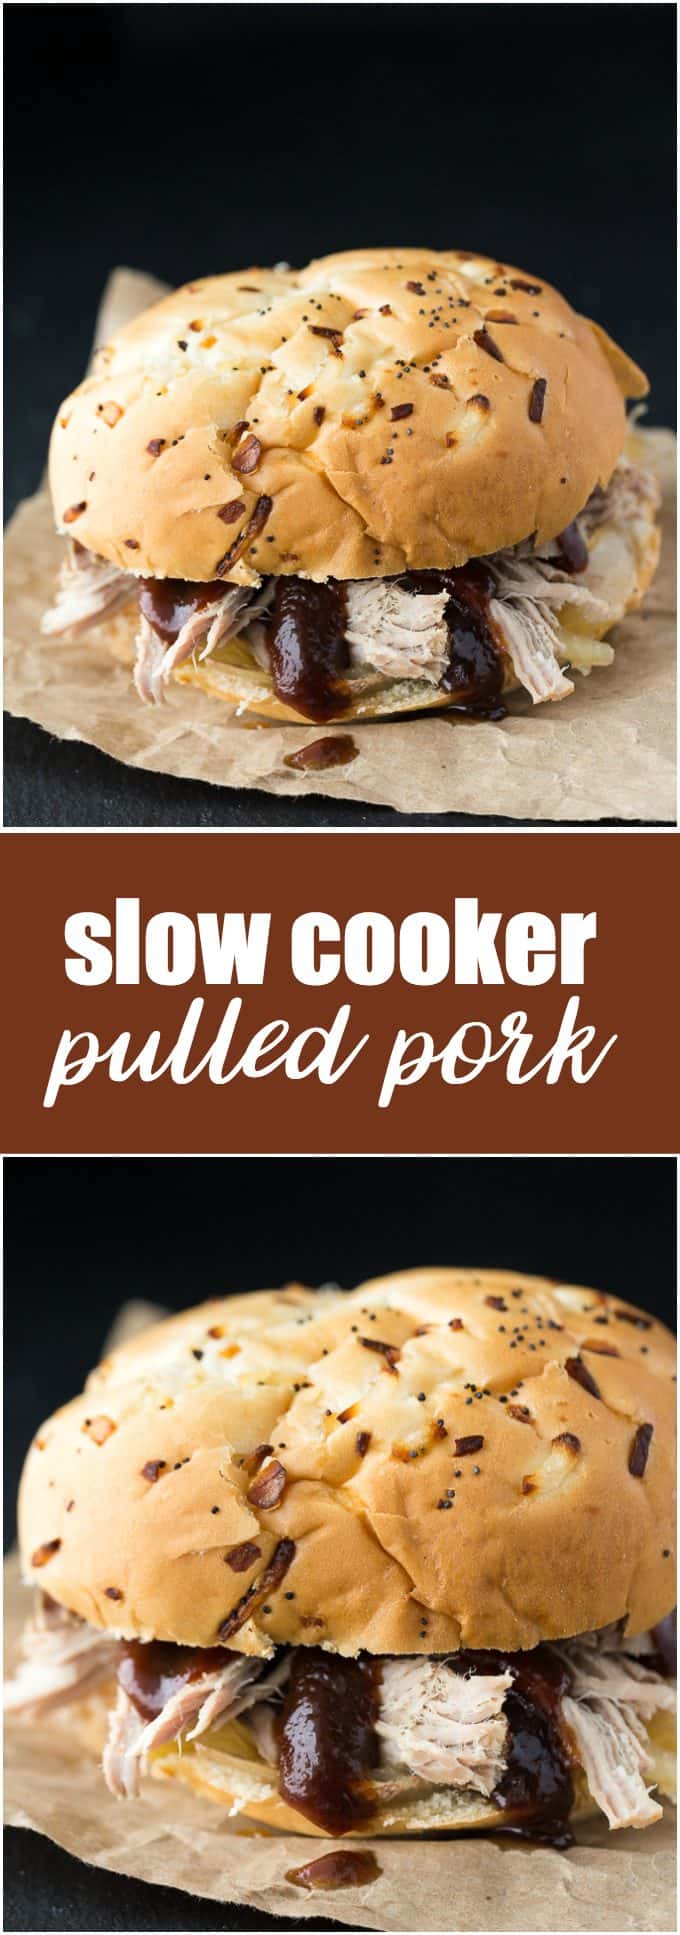 Slow Cooker Pulled Pork - You don't need a smoker for juicy pulled pork! Make this barbecue recipe in the Crockpot for sandwiches, baked potatoes, or pork tacos.